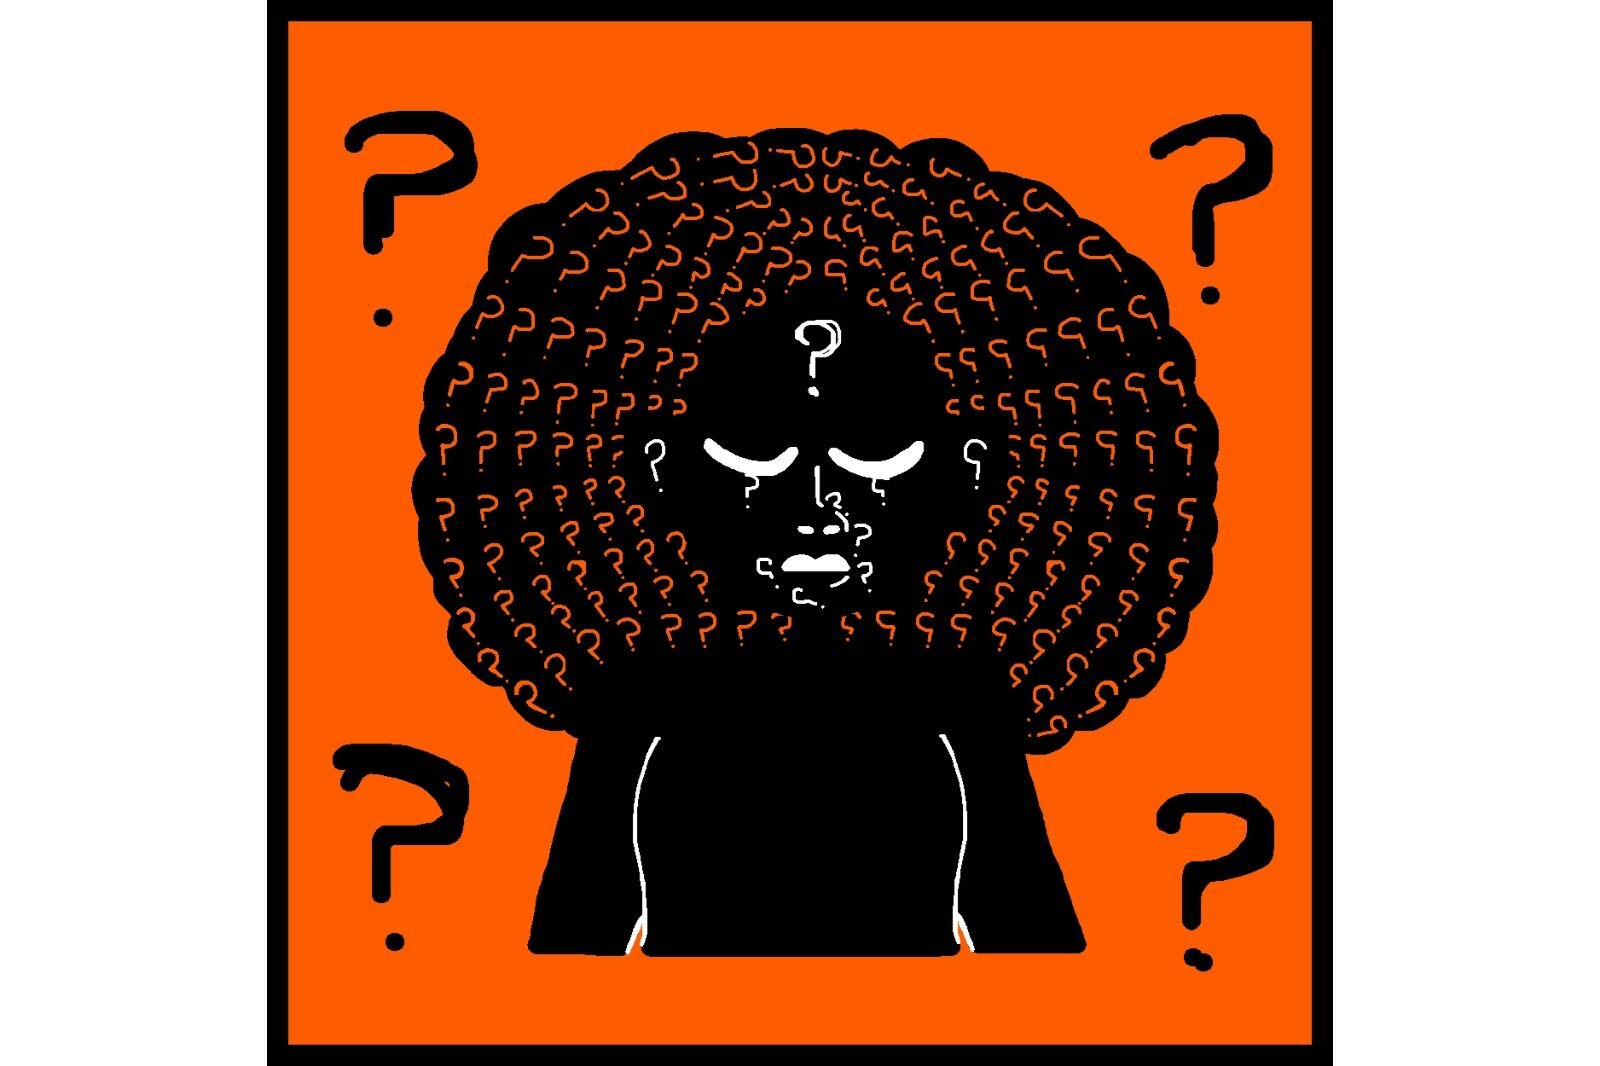 Racial Bias: An African American with a question mark afro as well as in other places, with the question marks representing poor representation of black people.